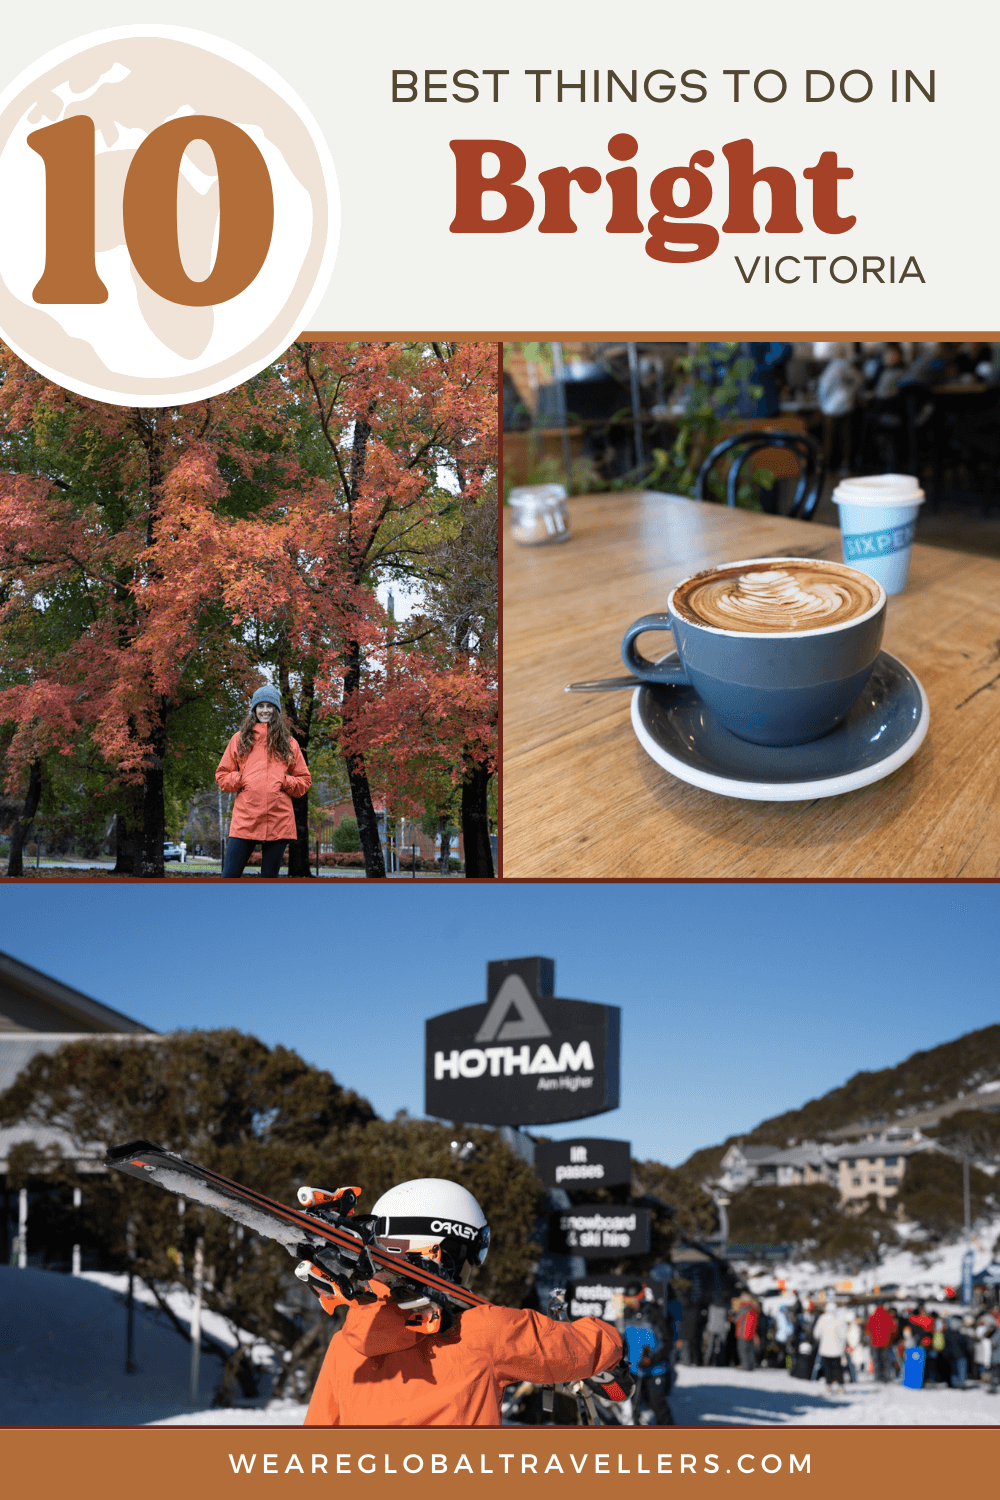 The best things to do in Bright, Victoria